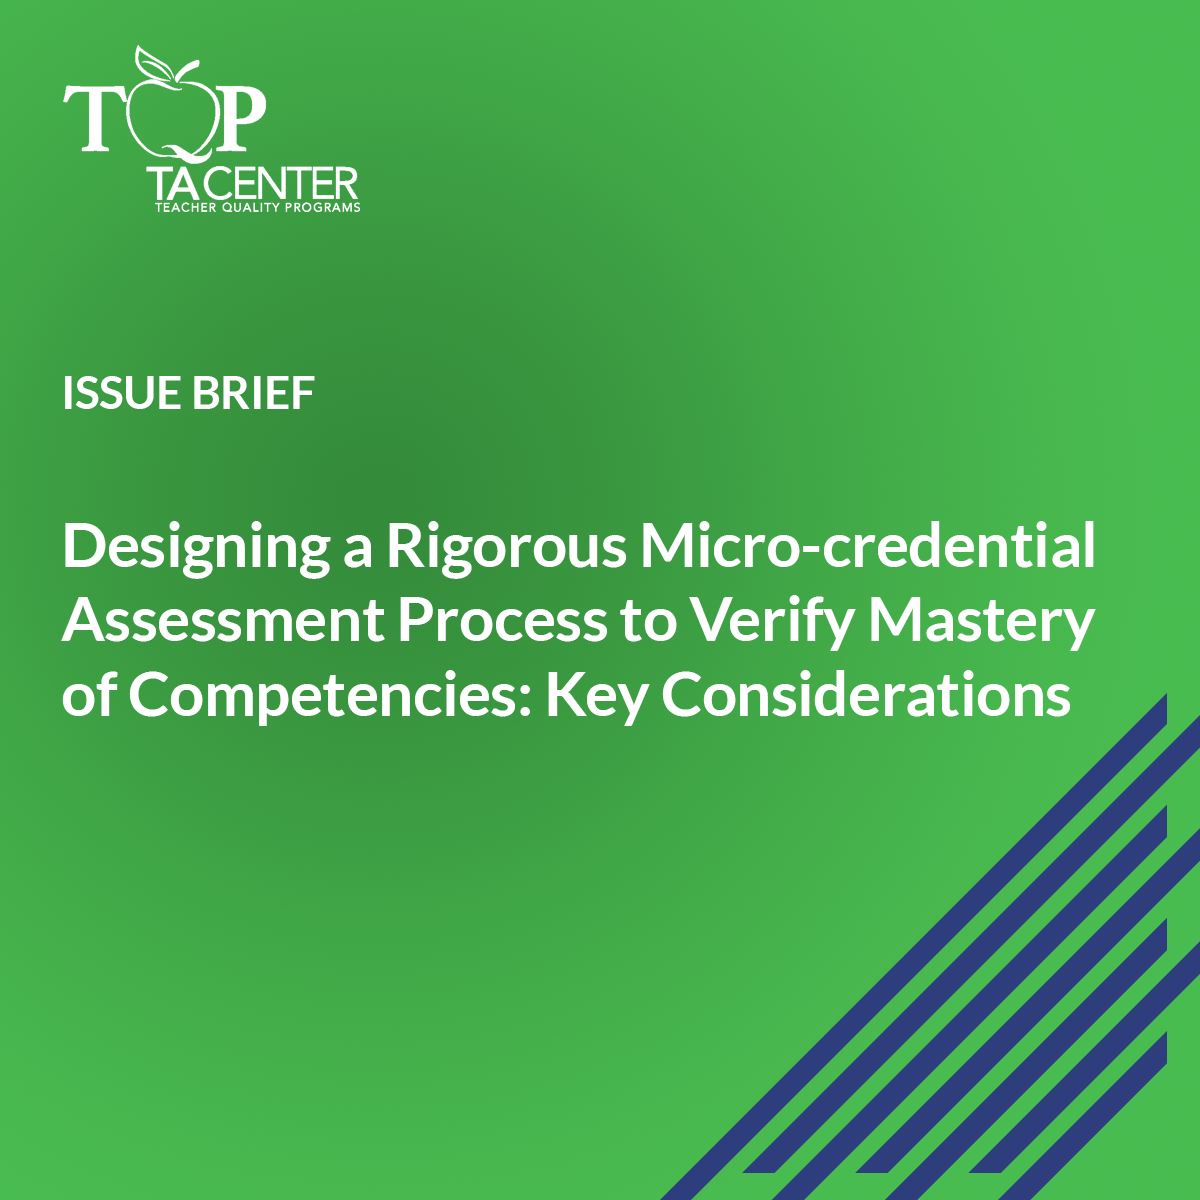 Designing a Rigorous Micro-Credential Assessment Process to Verify Mastery of Competencies